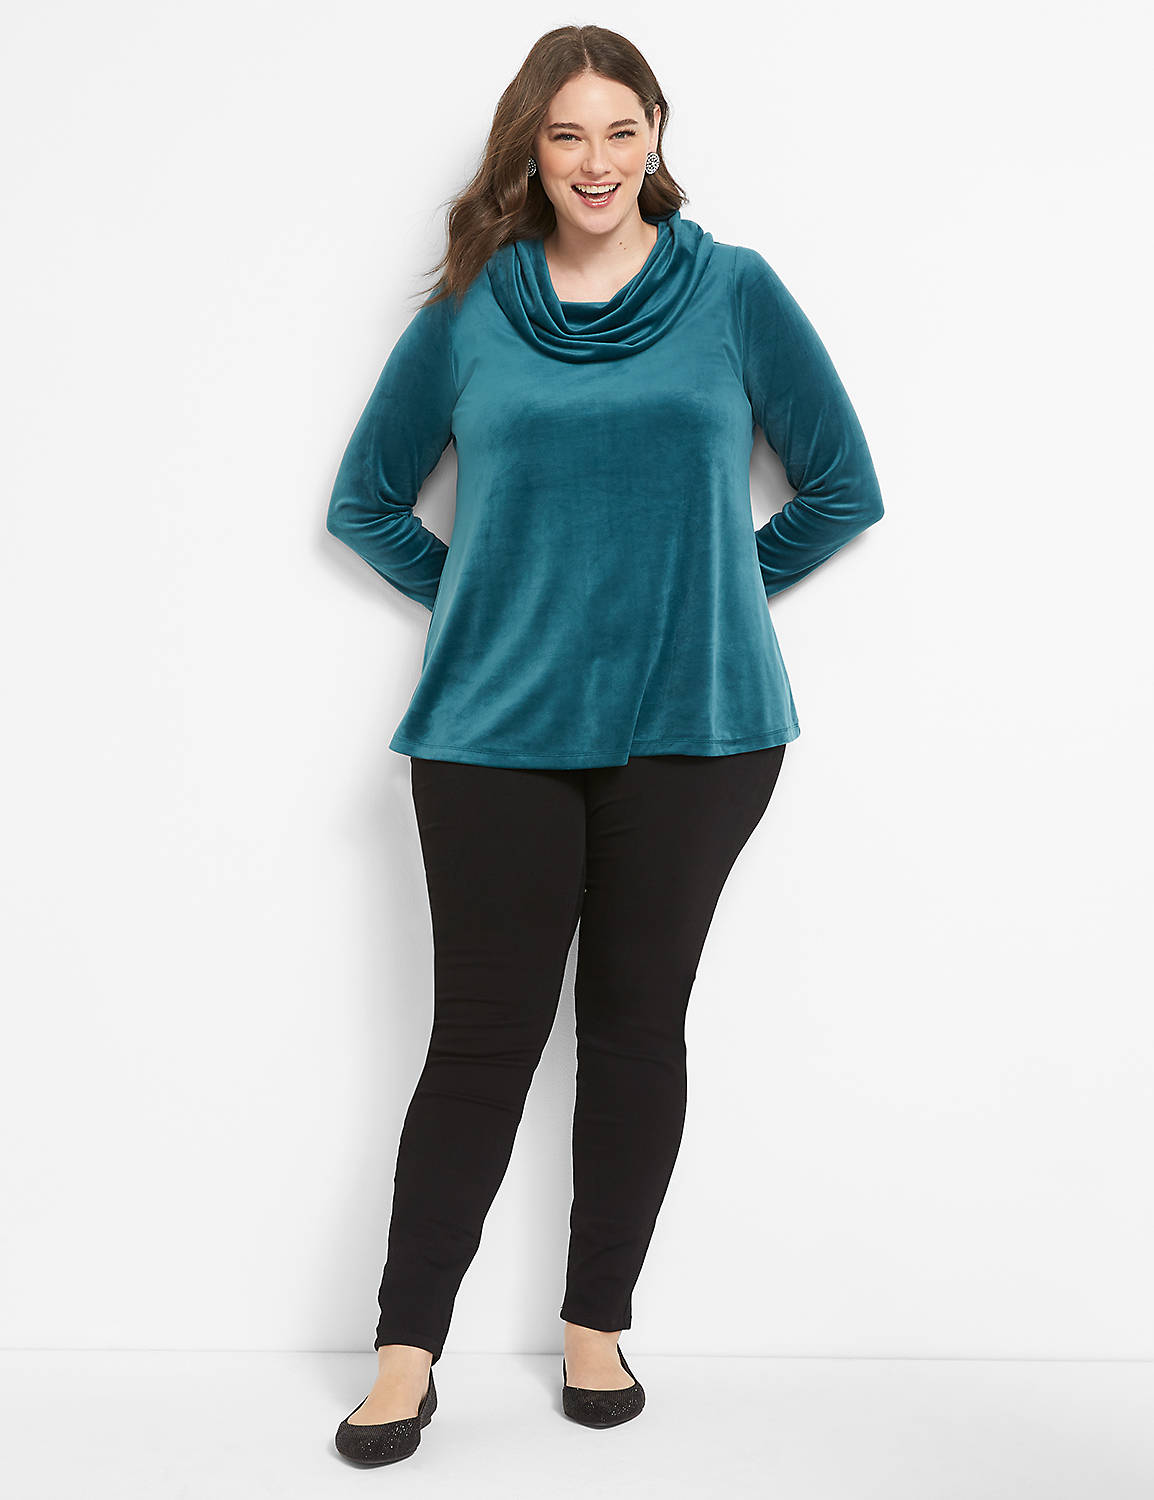 Long Sleeve Cowl Neck Moderate Swing Knit Top In Velour 1124634:PANTONE Deep Teal:10/12 Product Image 3